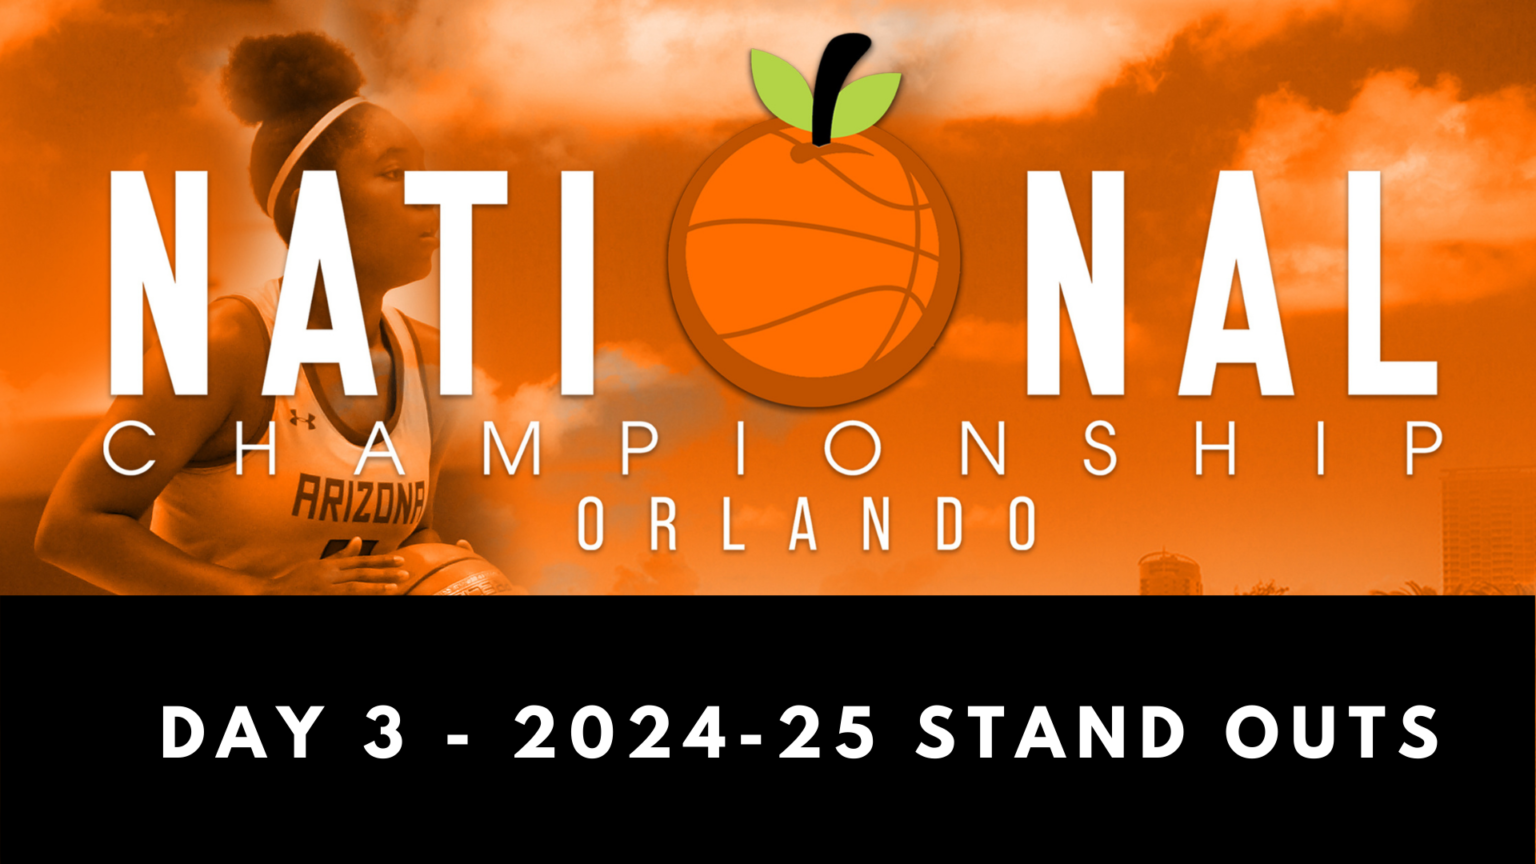 2024-25 Standouts from Day 3 – 2021 National Championship | Prep Girls